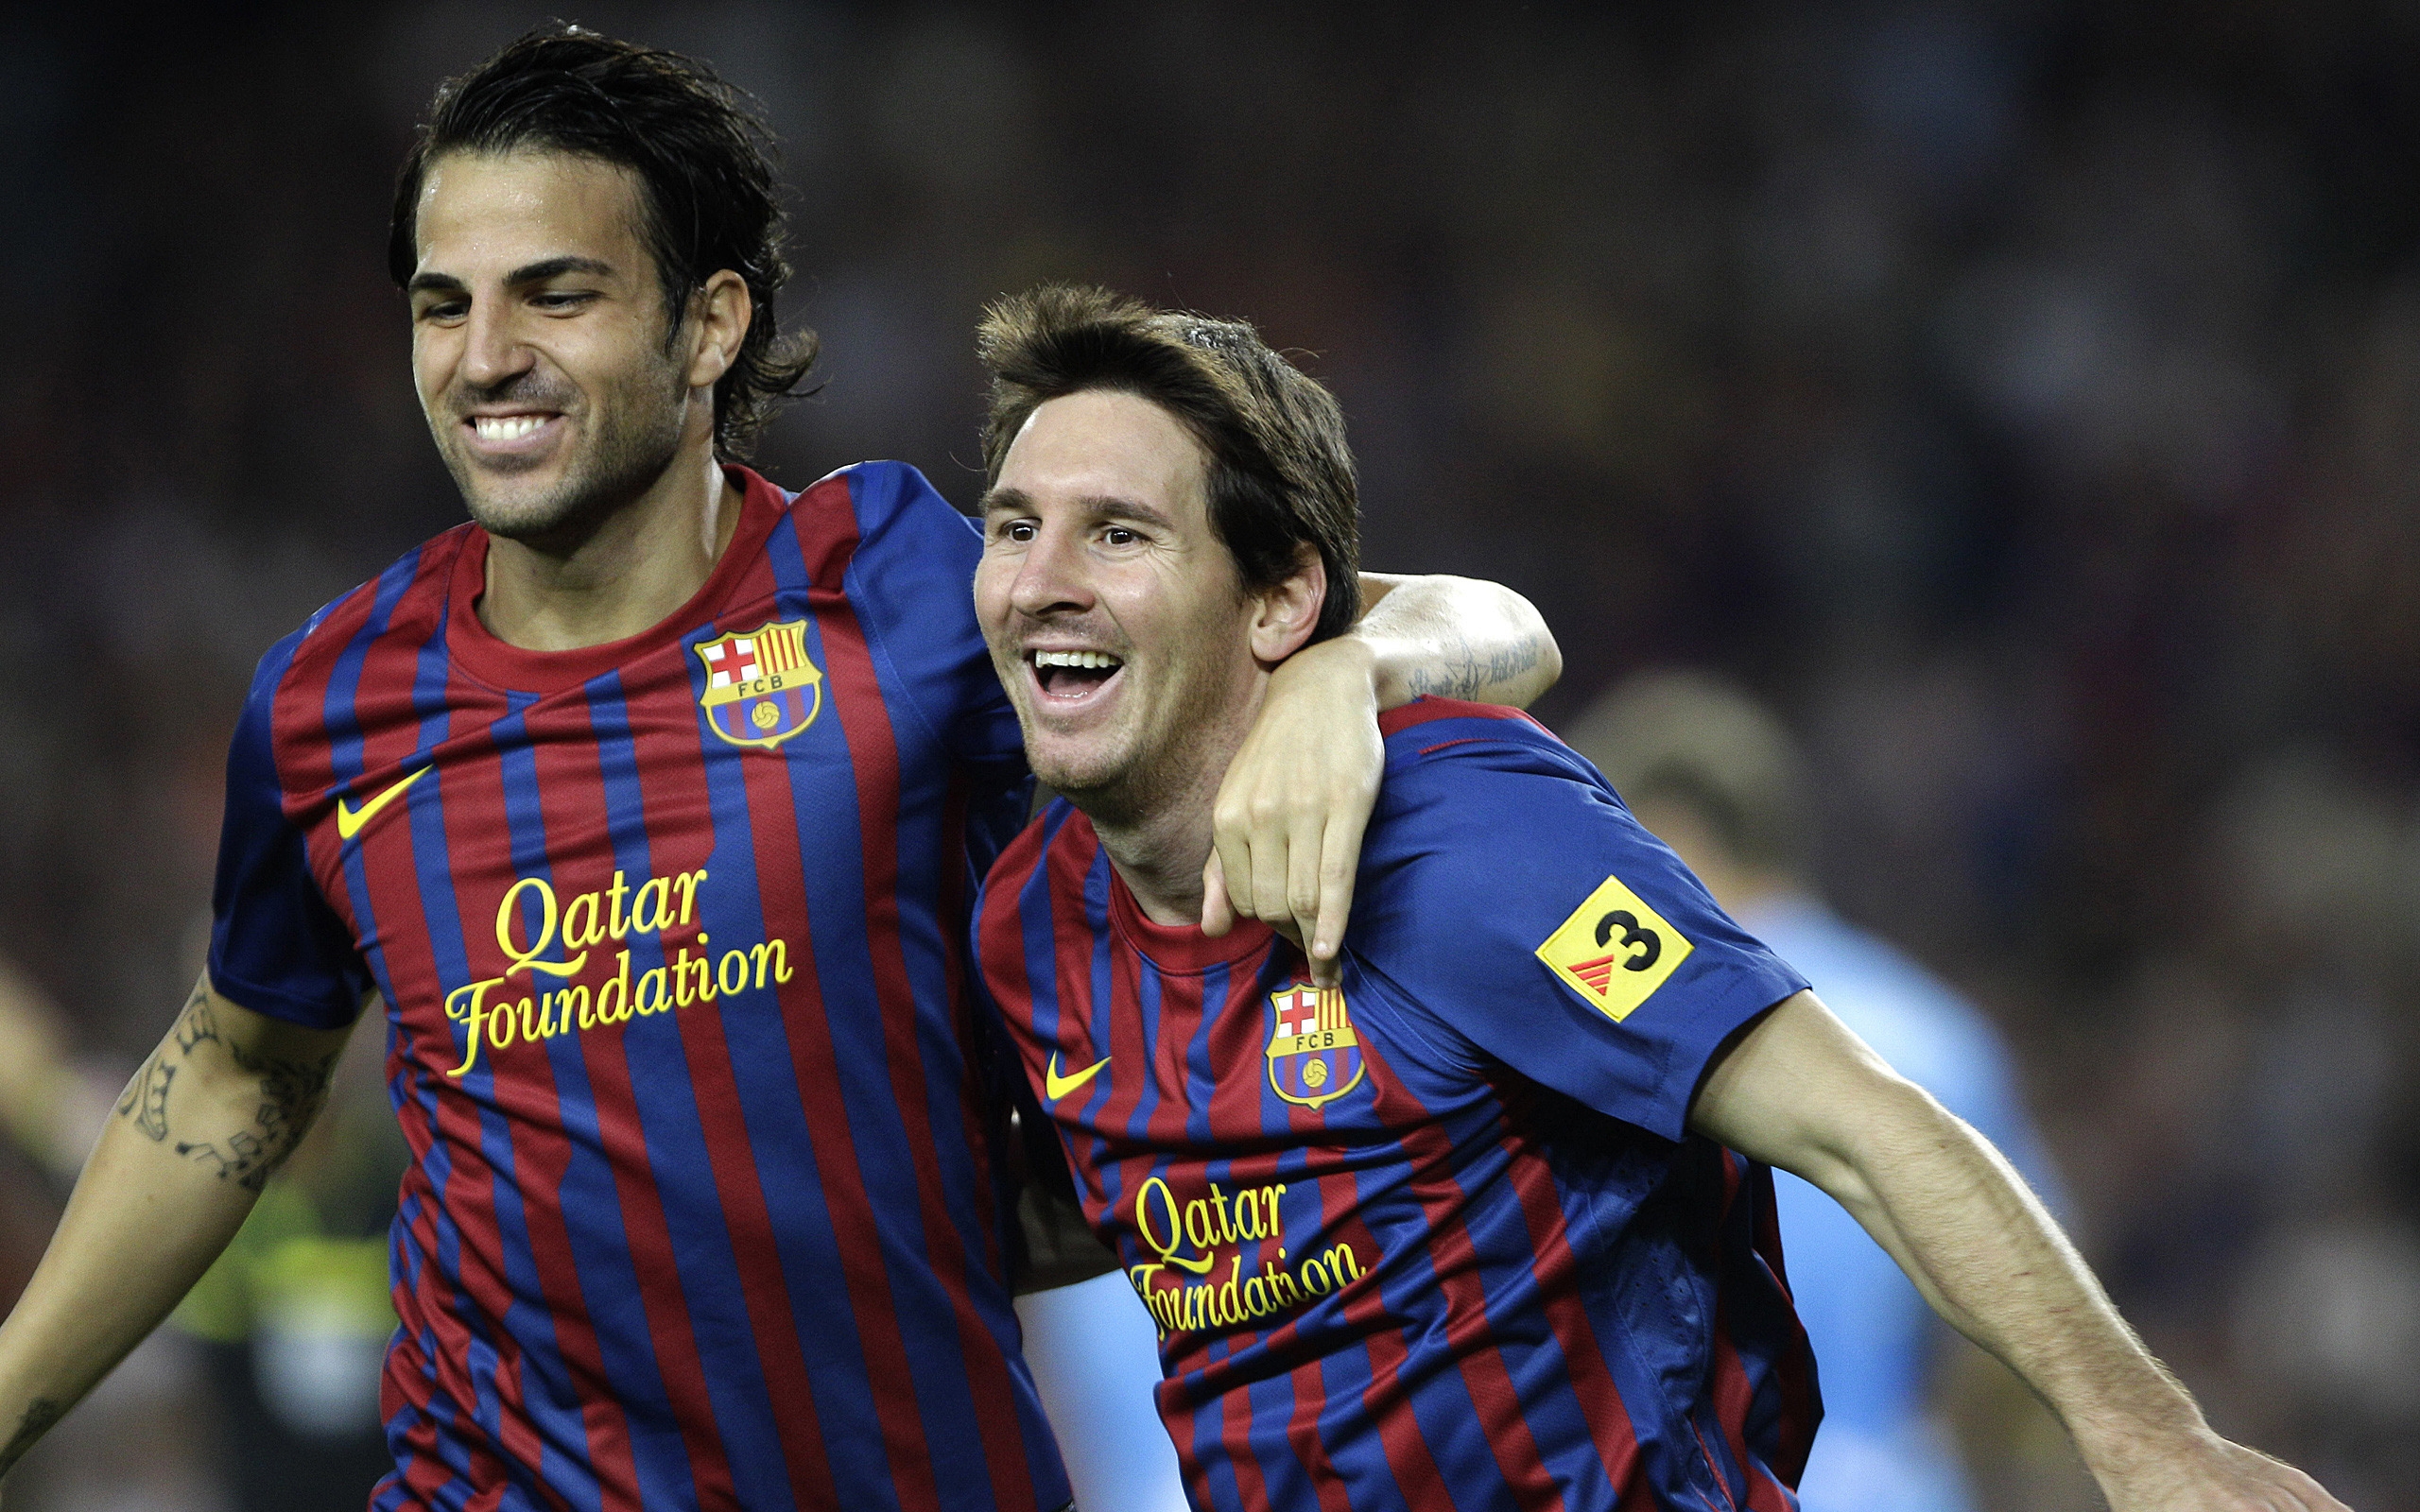 Cesc Fabregas and Lionel Messi for 2560 x 1600 widescreen resolution